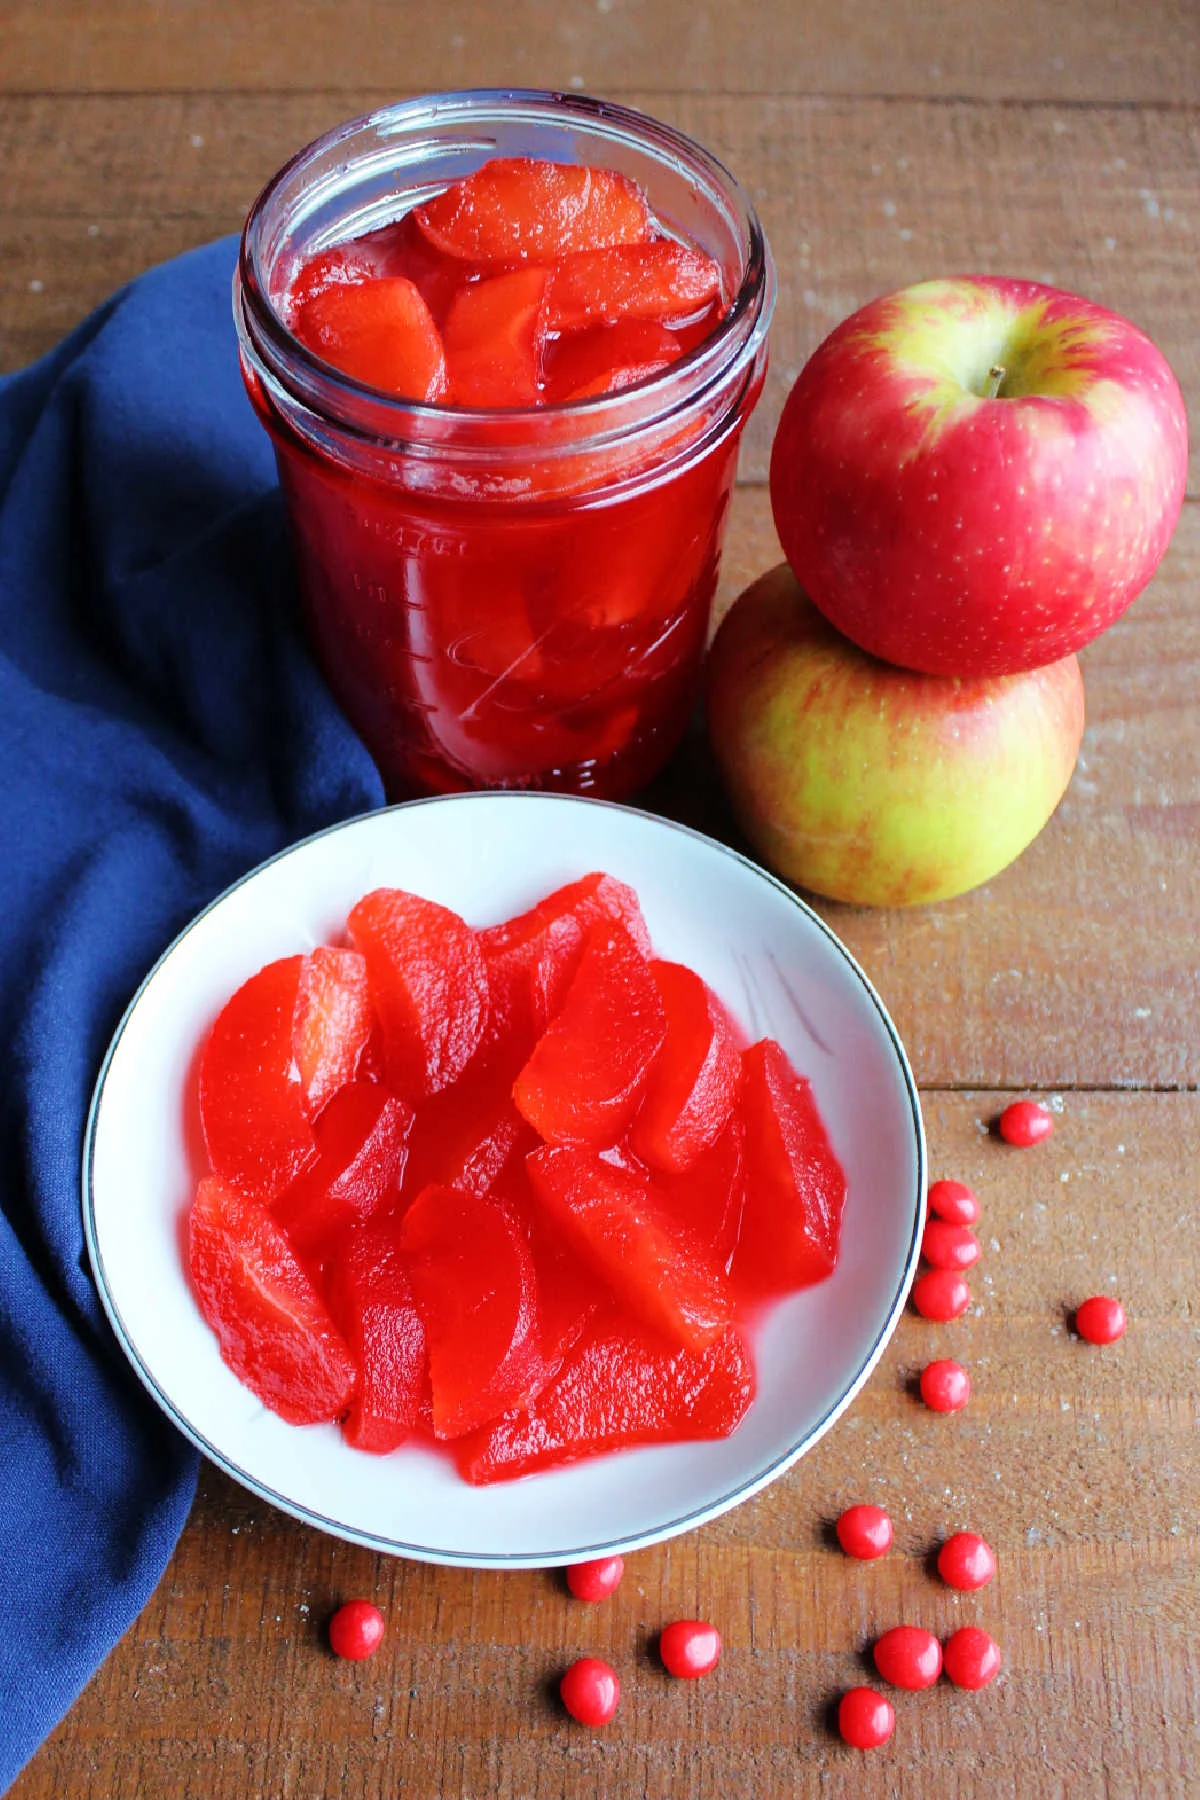 Bowl of red hot apples next to a jar with more apple slices in it with fresh apples and red hot candies.